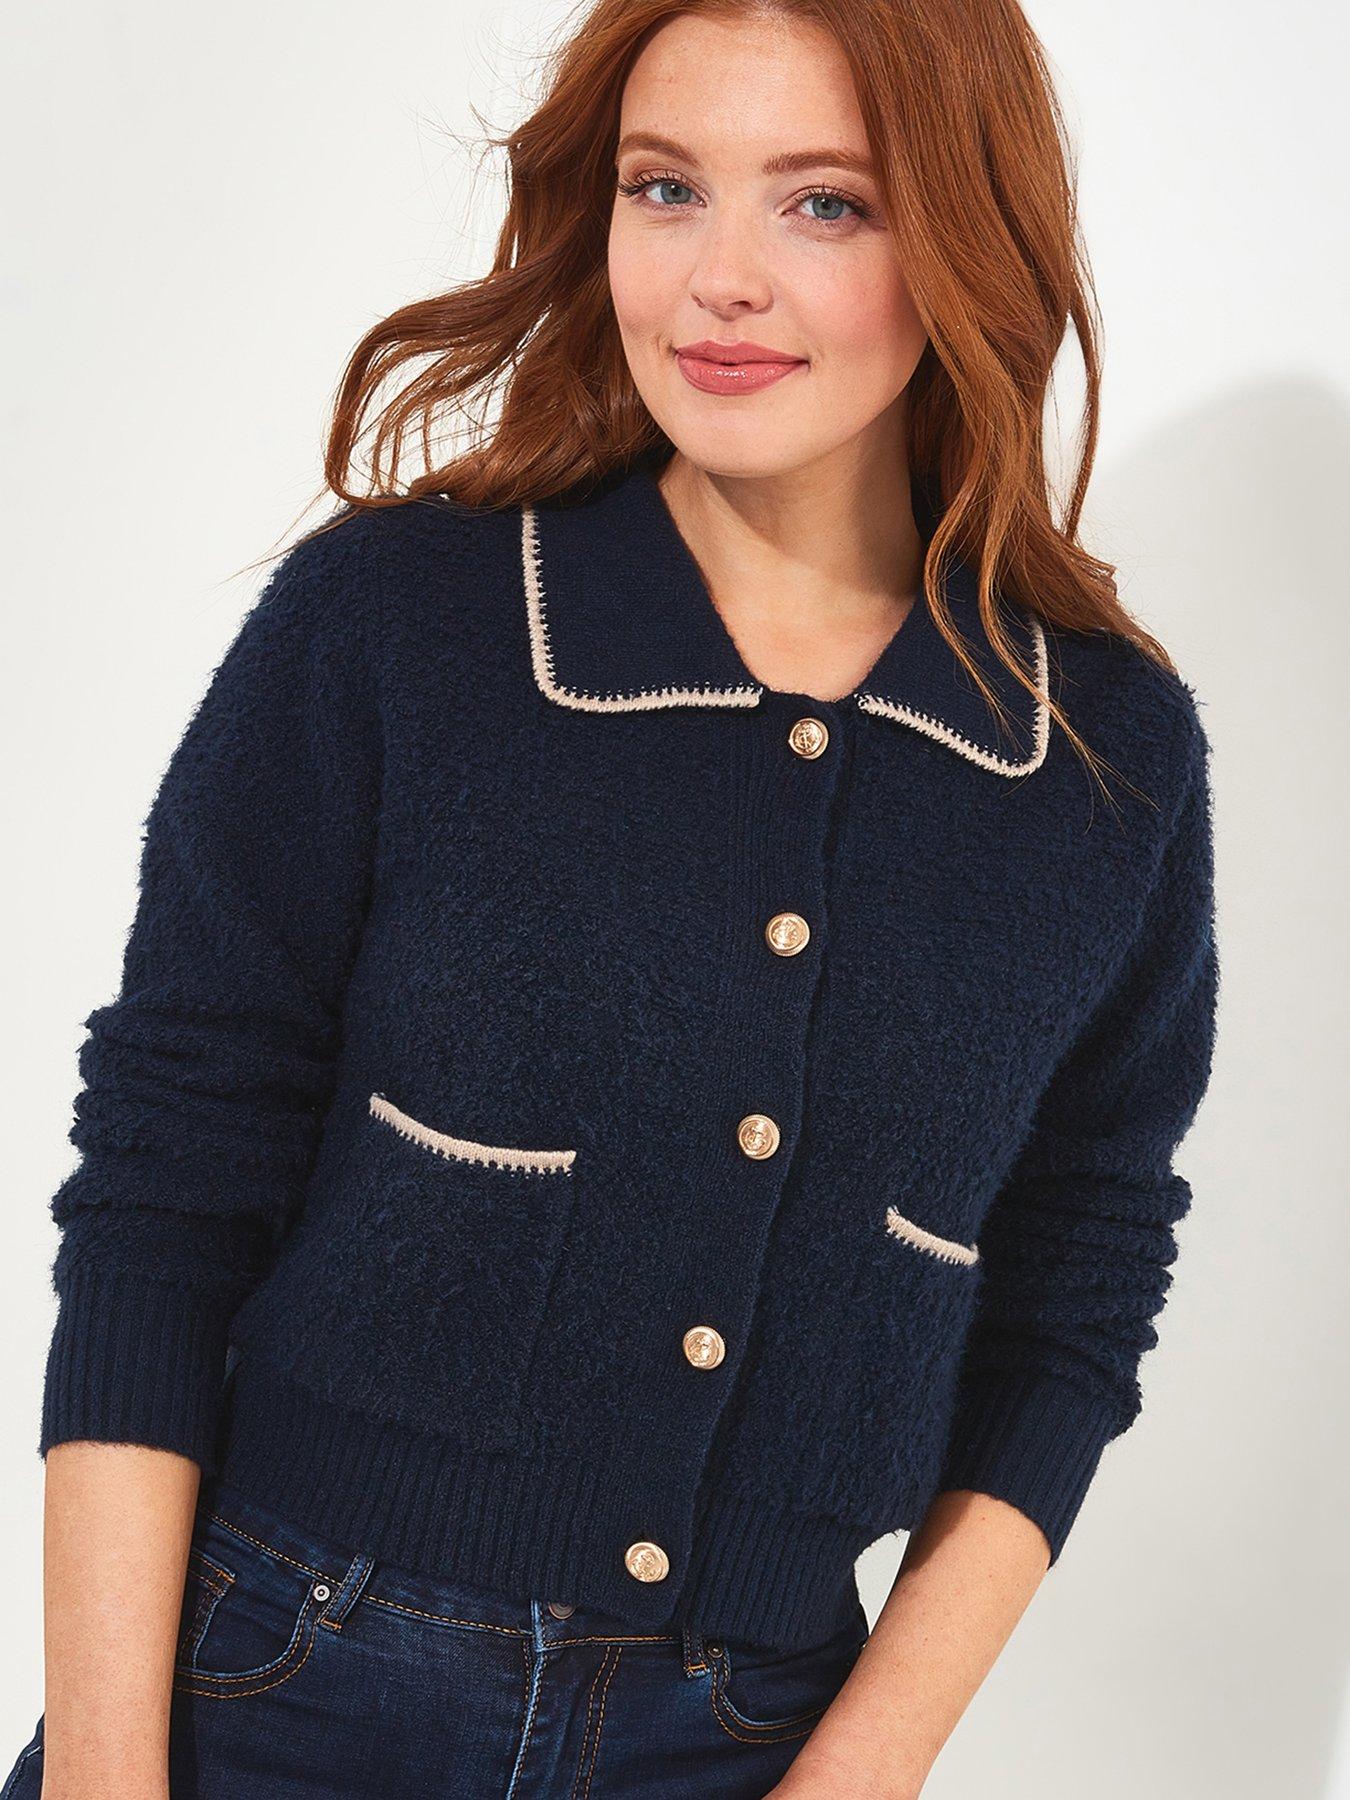 Chunky Feminine Knitted Cardigans – 1001 Patterns